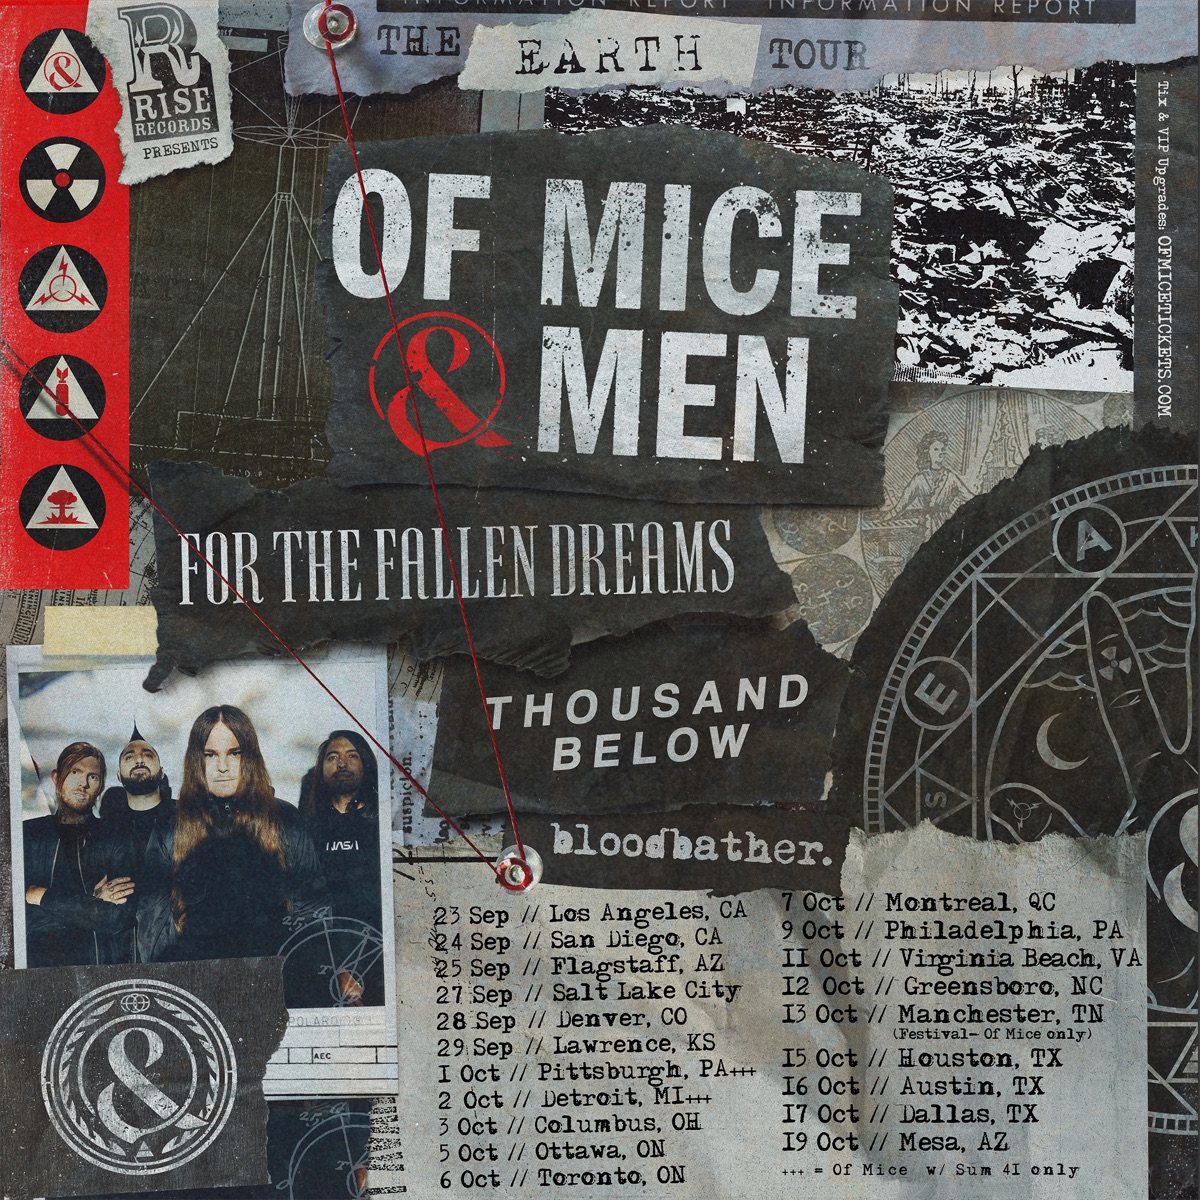 Of Mice & Men Want You To Experience the "Taste of Regret"